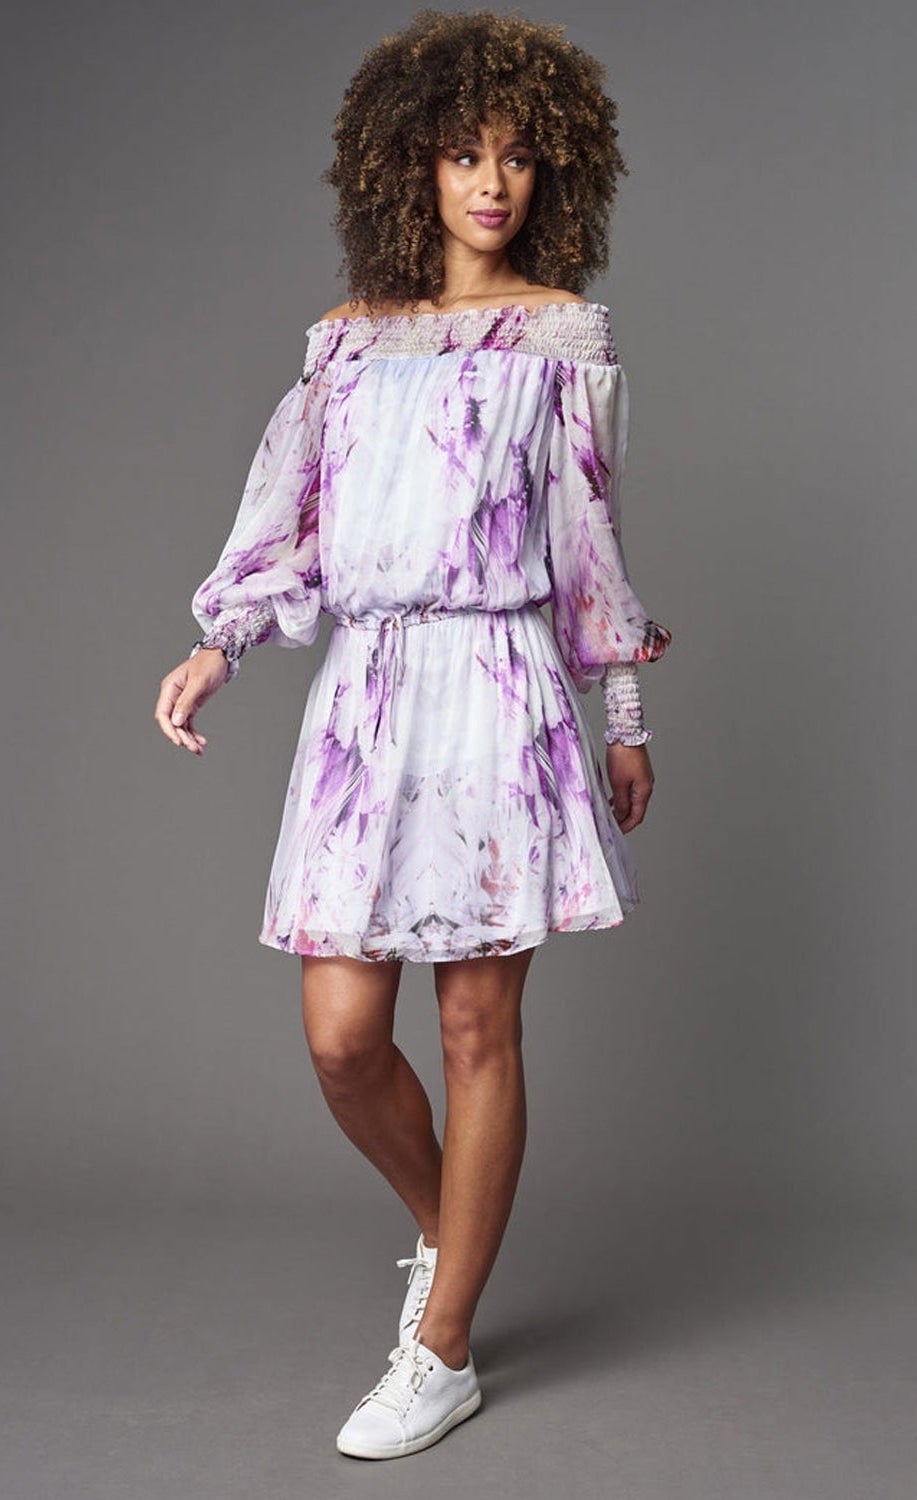 Front full body view of a woman wearing the lola & sophie Painted Flower Chiffon Off-Shoulder Dress. This dress is white with lilac/pink painted flowers. The dress has bishop sleeves with elastic cuffs and a drawstring waistband.